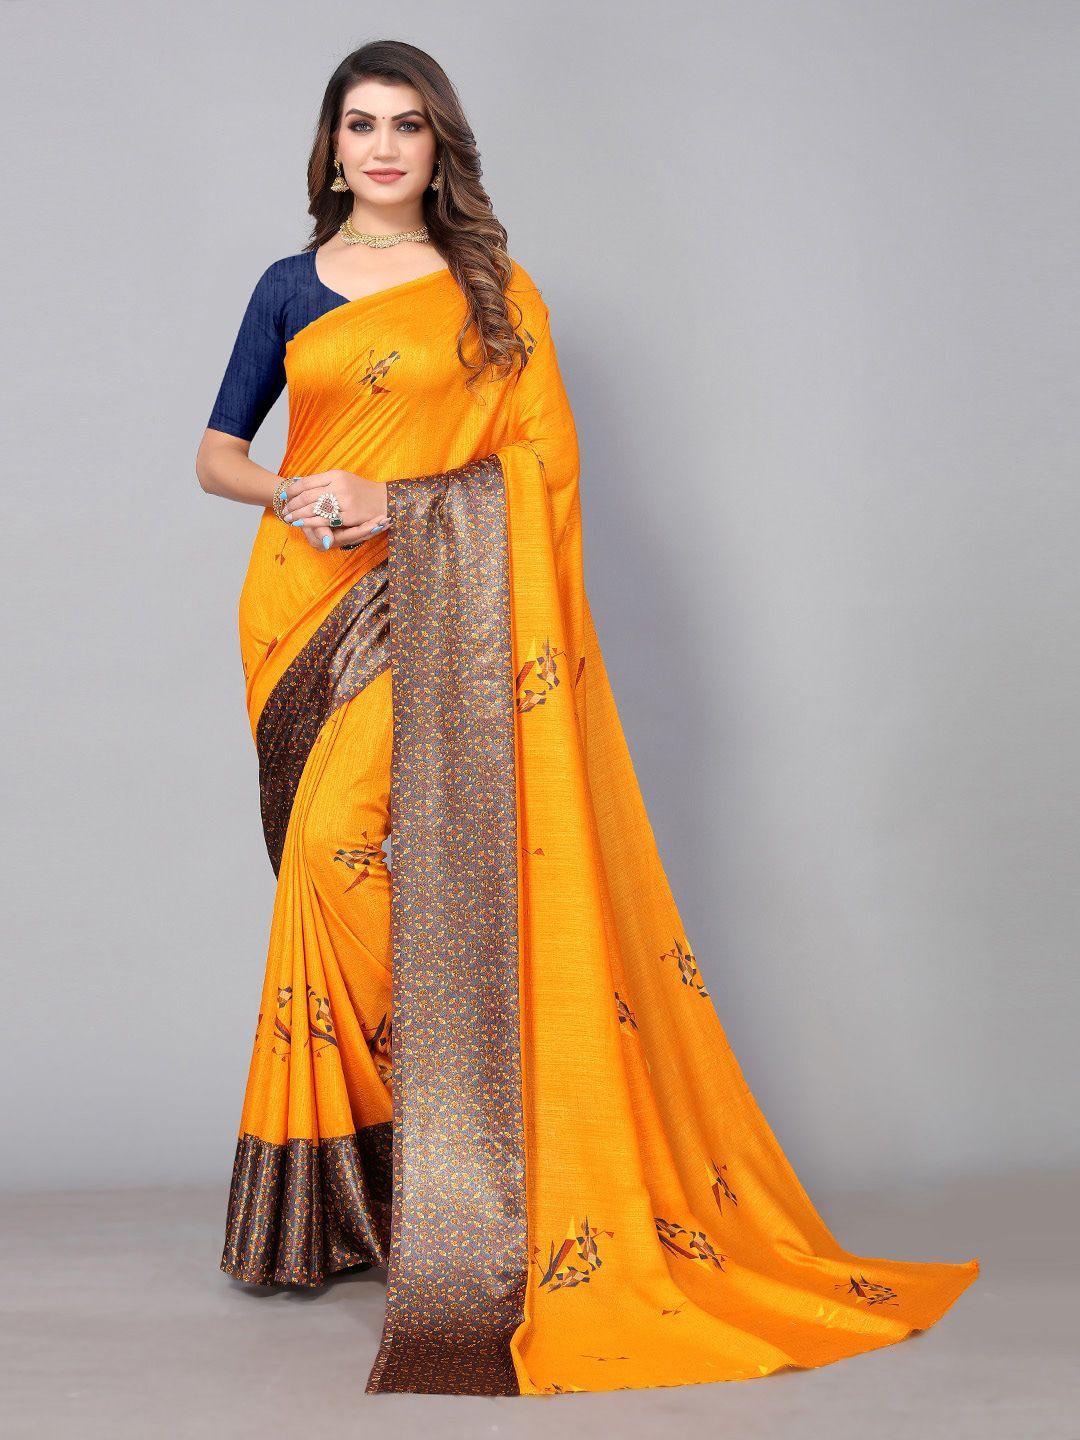 shaily floral printed ethnic saree